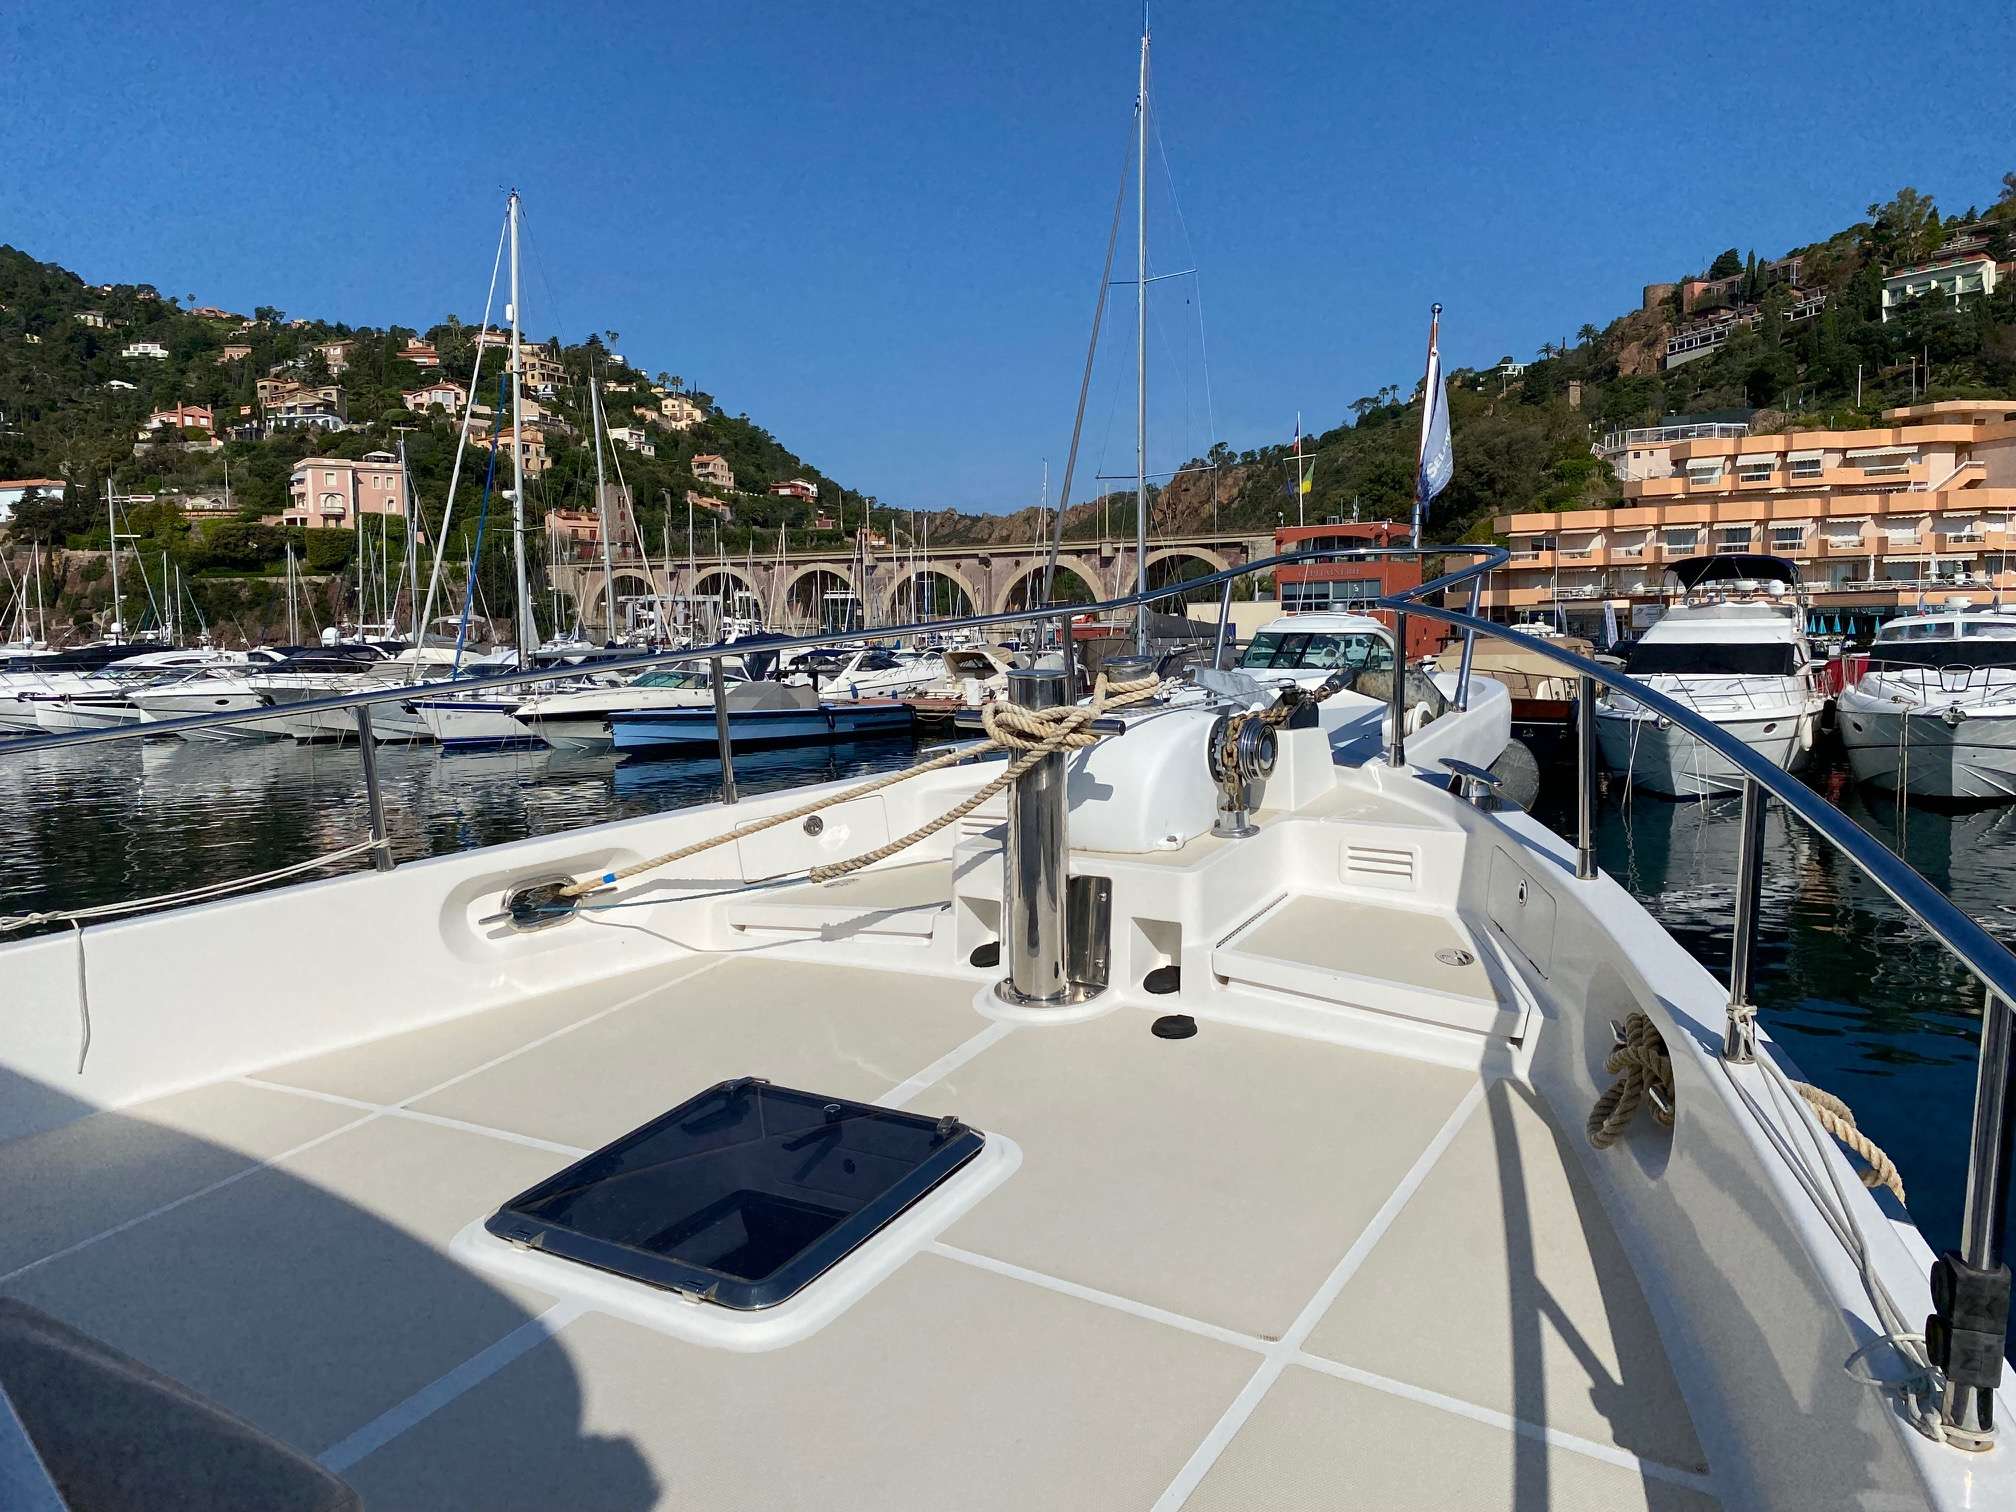 NOMADES - Yacht Charter Cannes & Boat hire in Fr. Riviera, Corsica & Sardinia 4